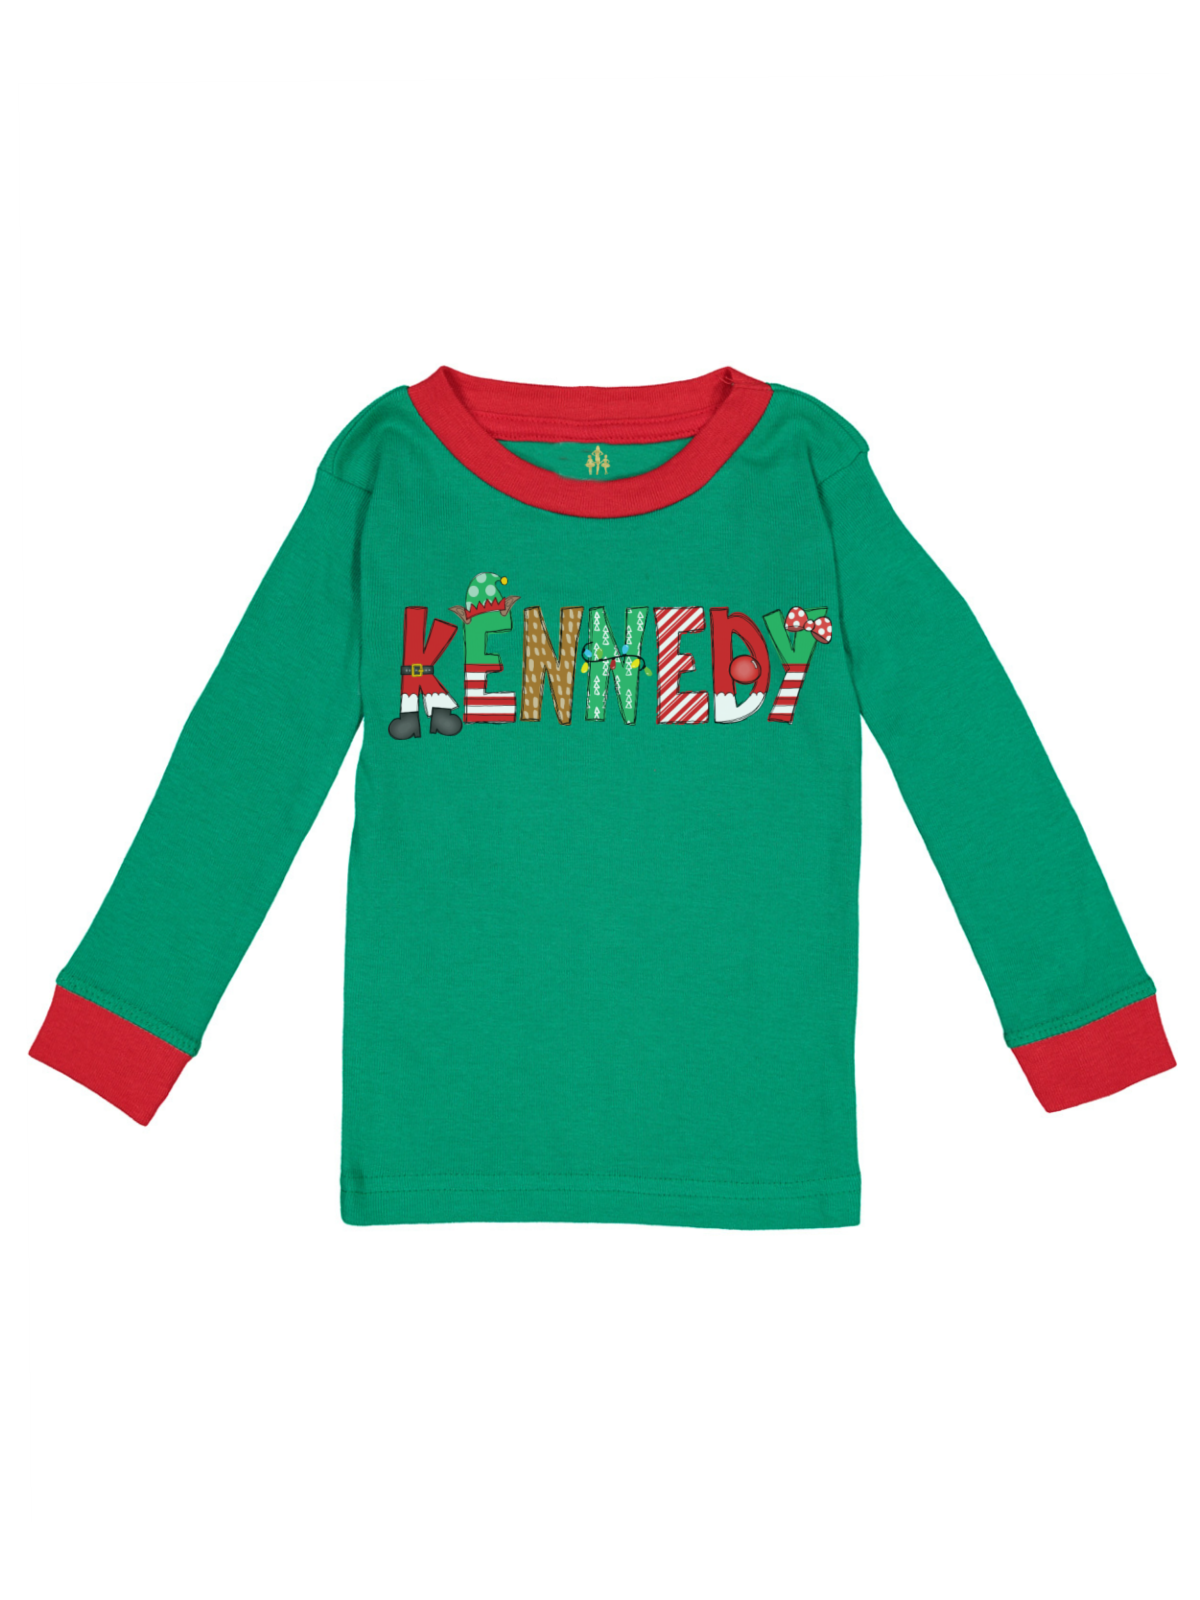 Personalized Kids Christmas Pajama Top Red and Green